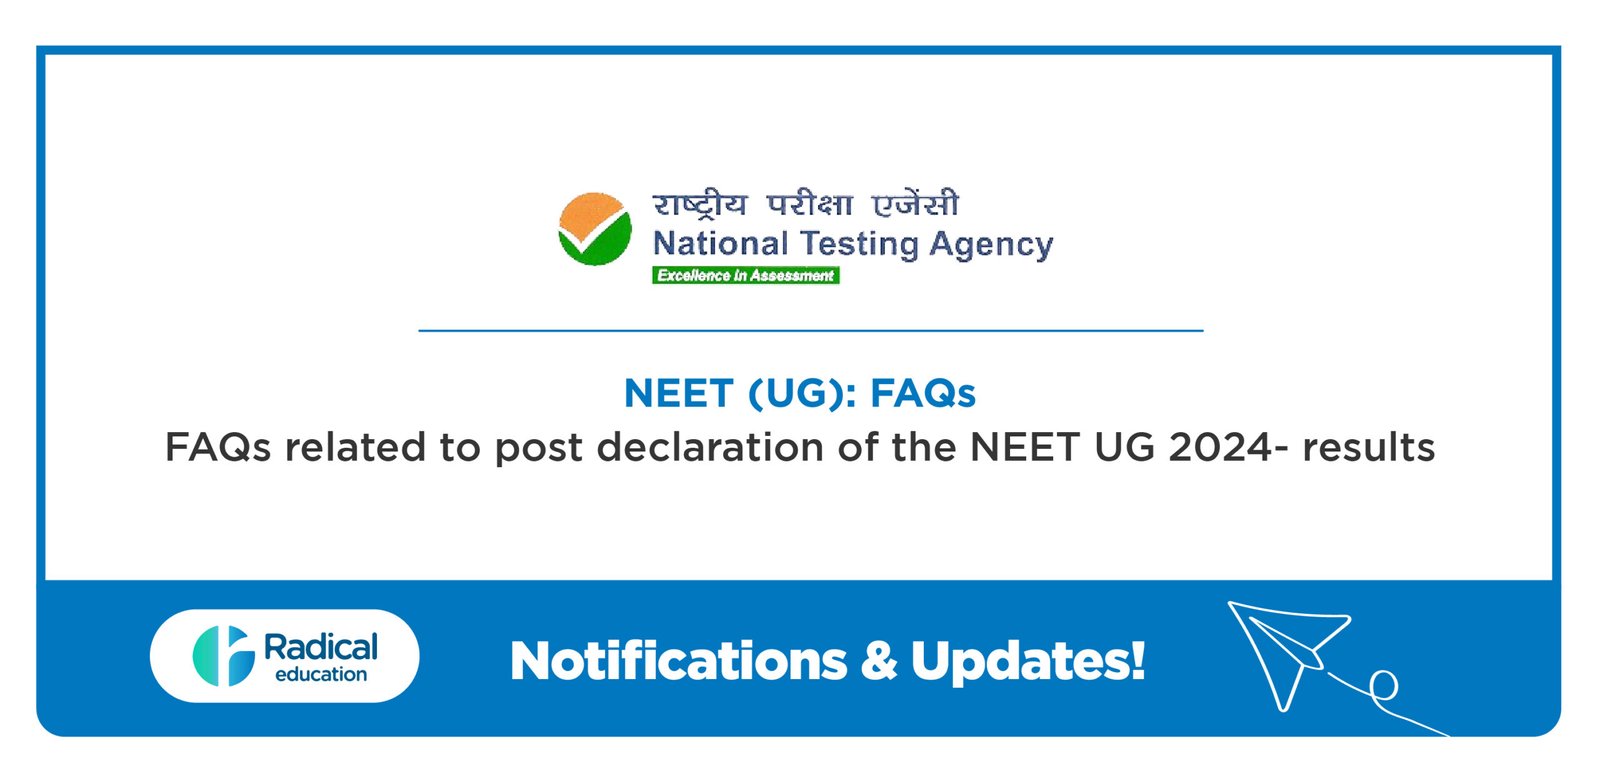 FAQs related to post-declaration of the NEET UG 2024- results